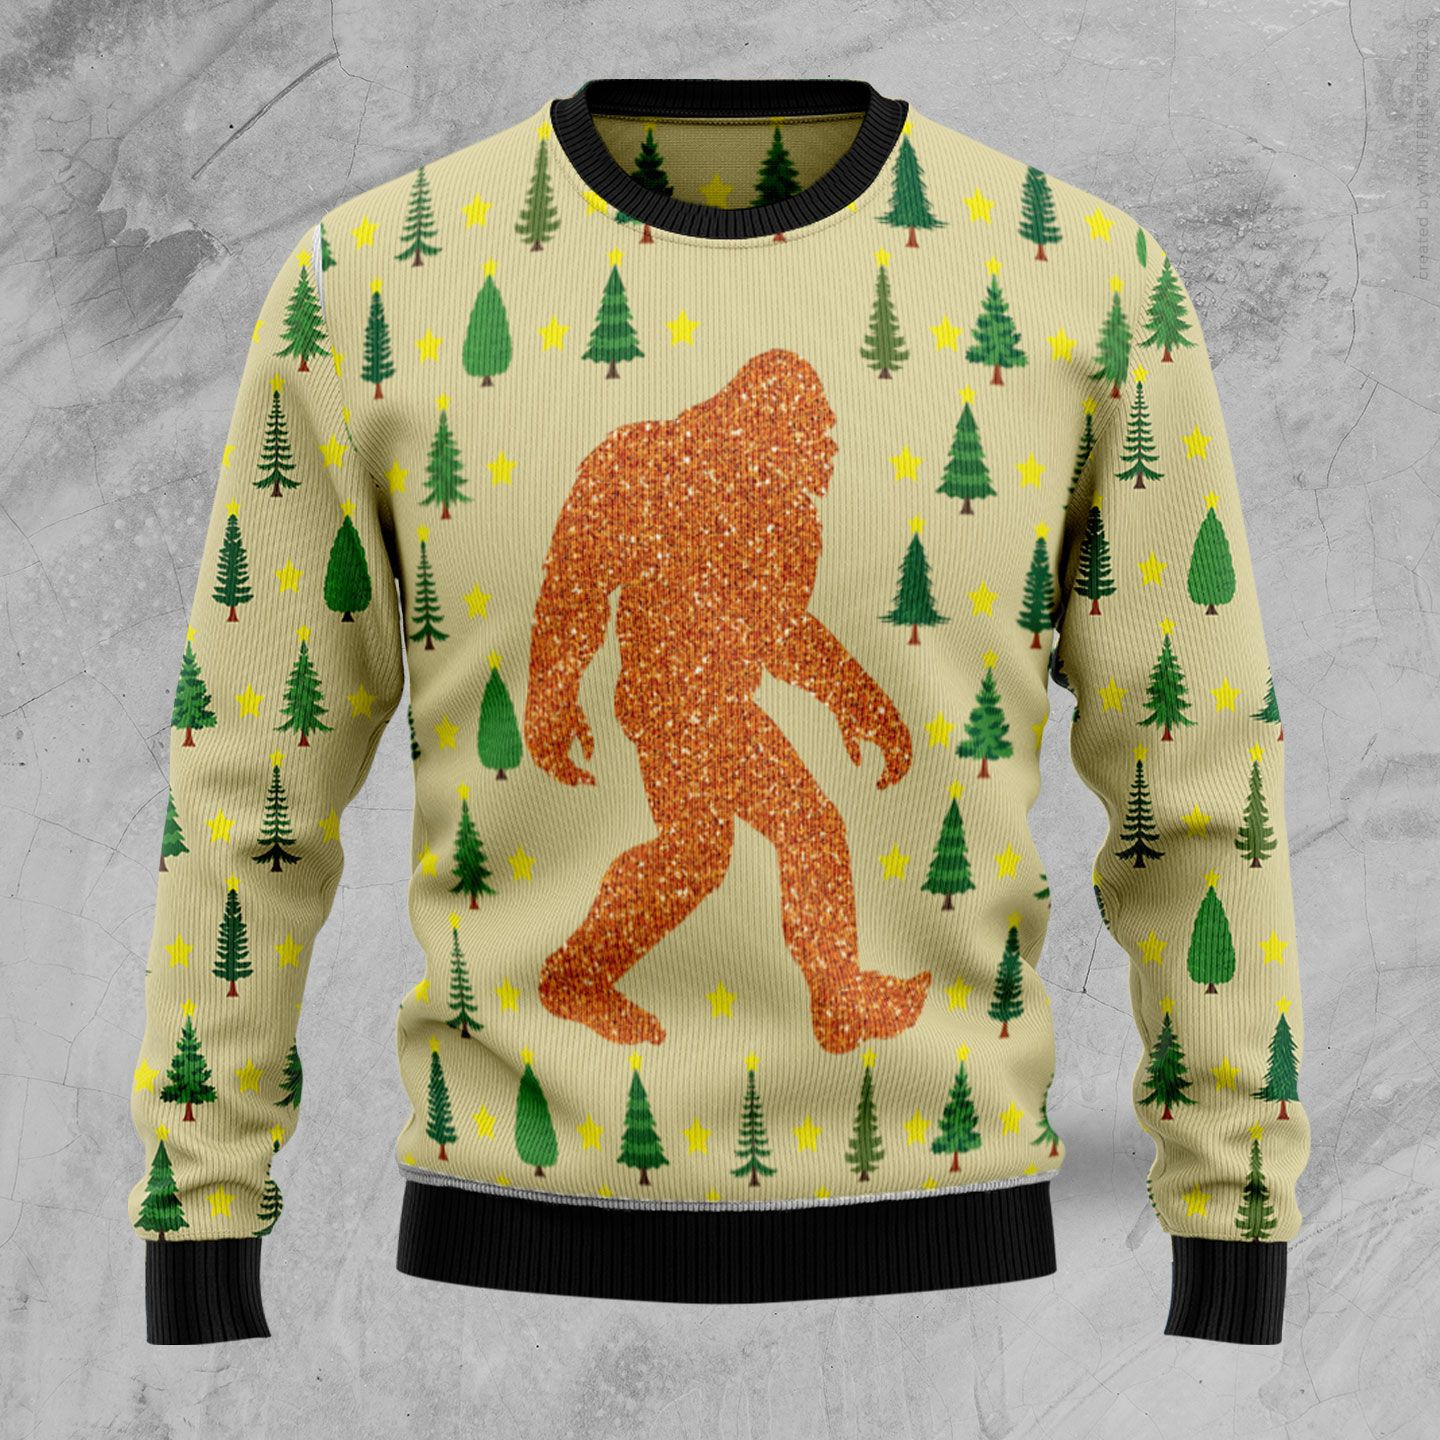 Bigfoot Sasquatch Ugly Christmas Sweater Ugly Sweater For Men Women, Holiday Sweater